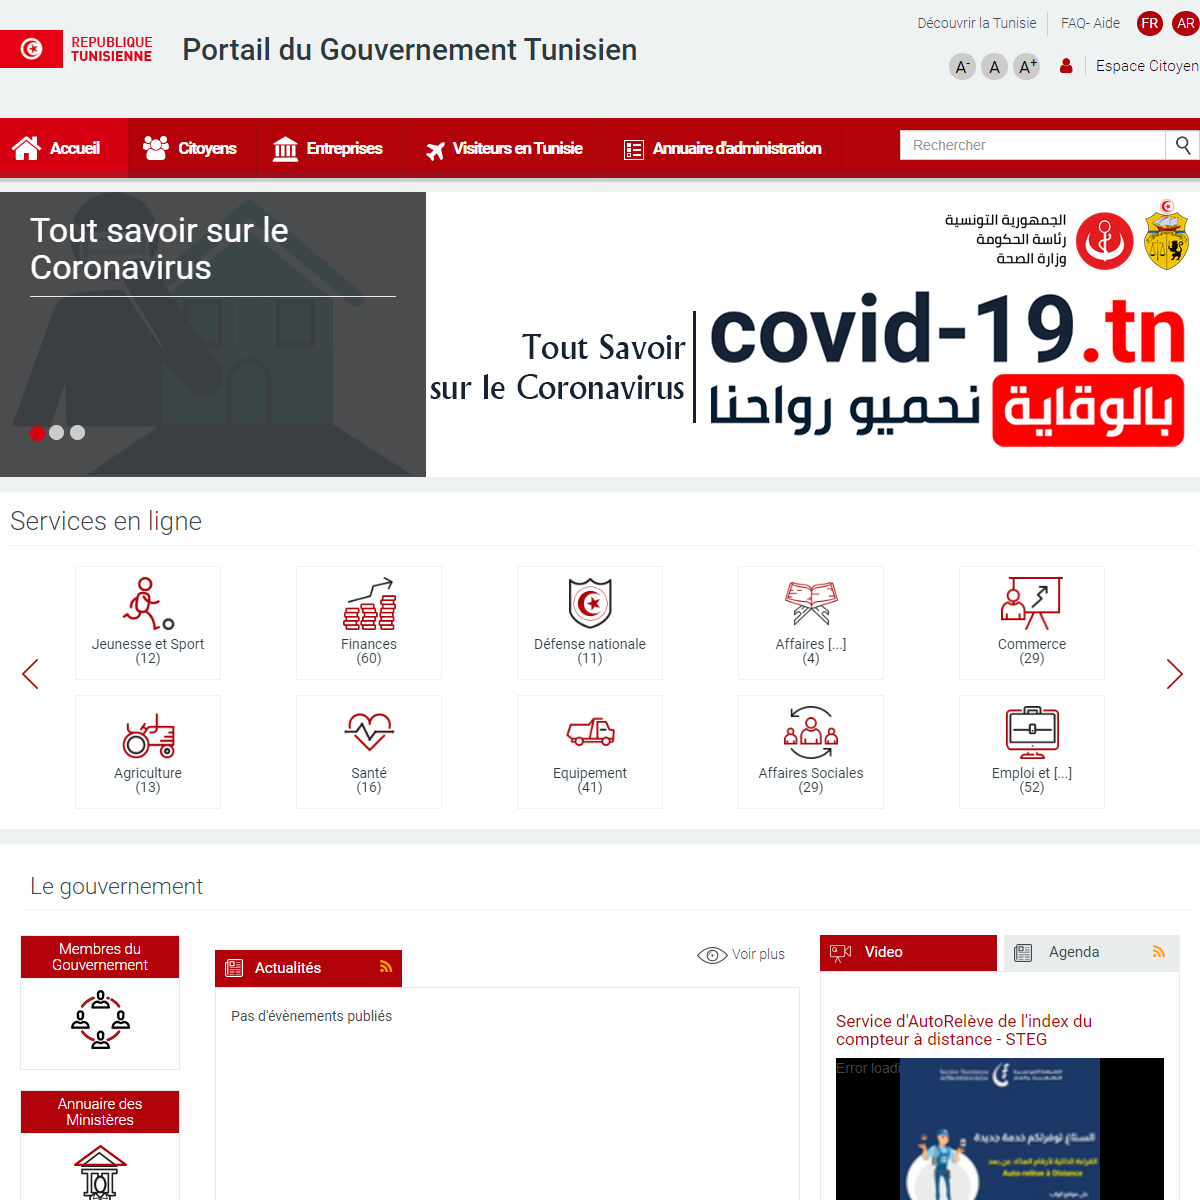 A complete backup of http://fr.tunisie.gov.tn/